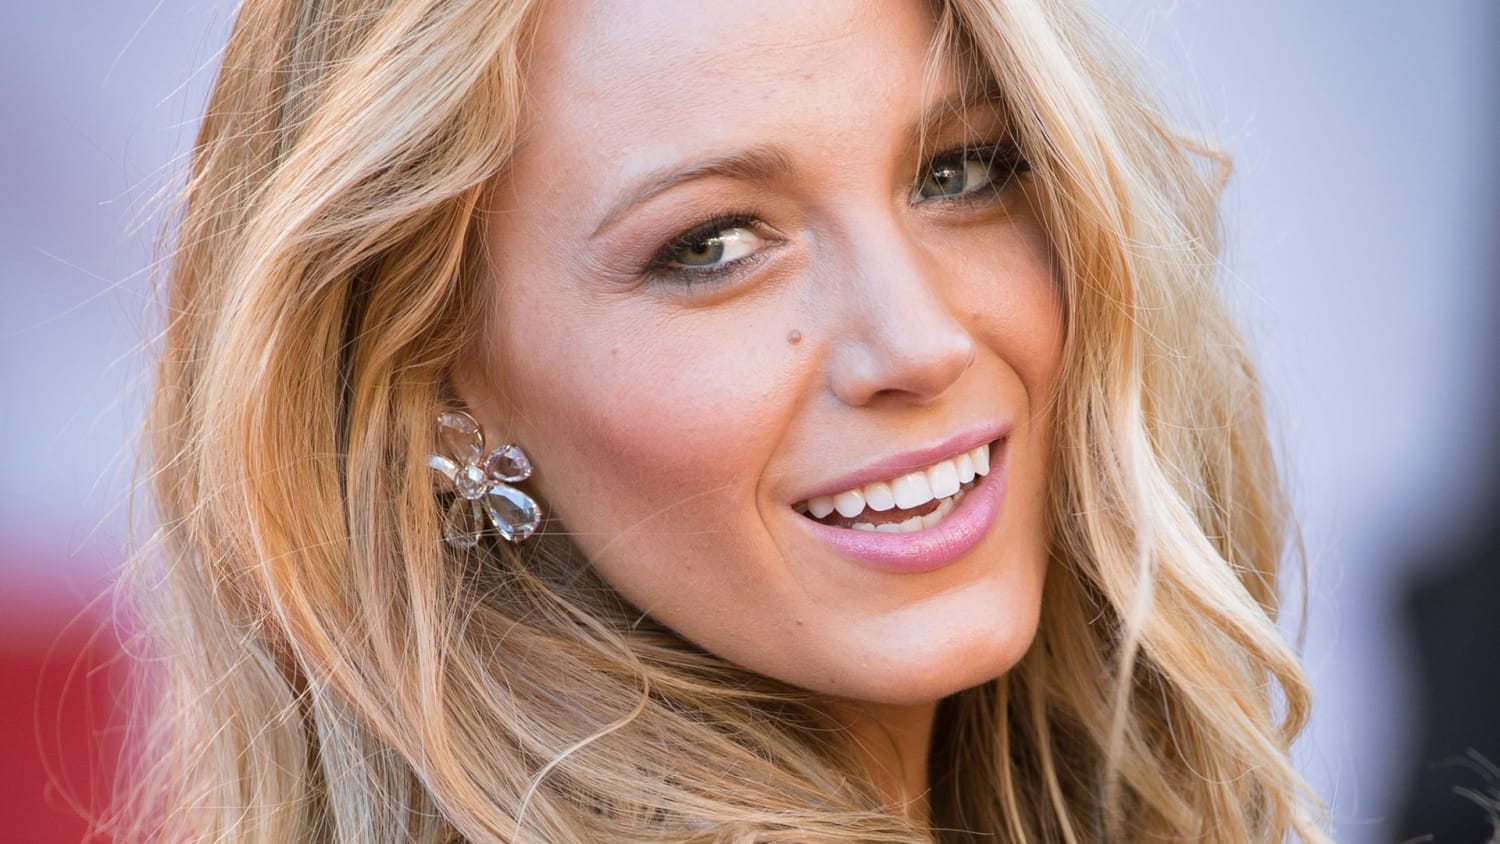 Blake Lively goes 'bronde': See the trendy hair color - TODAY.com